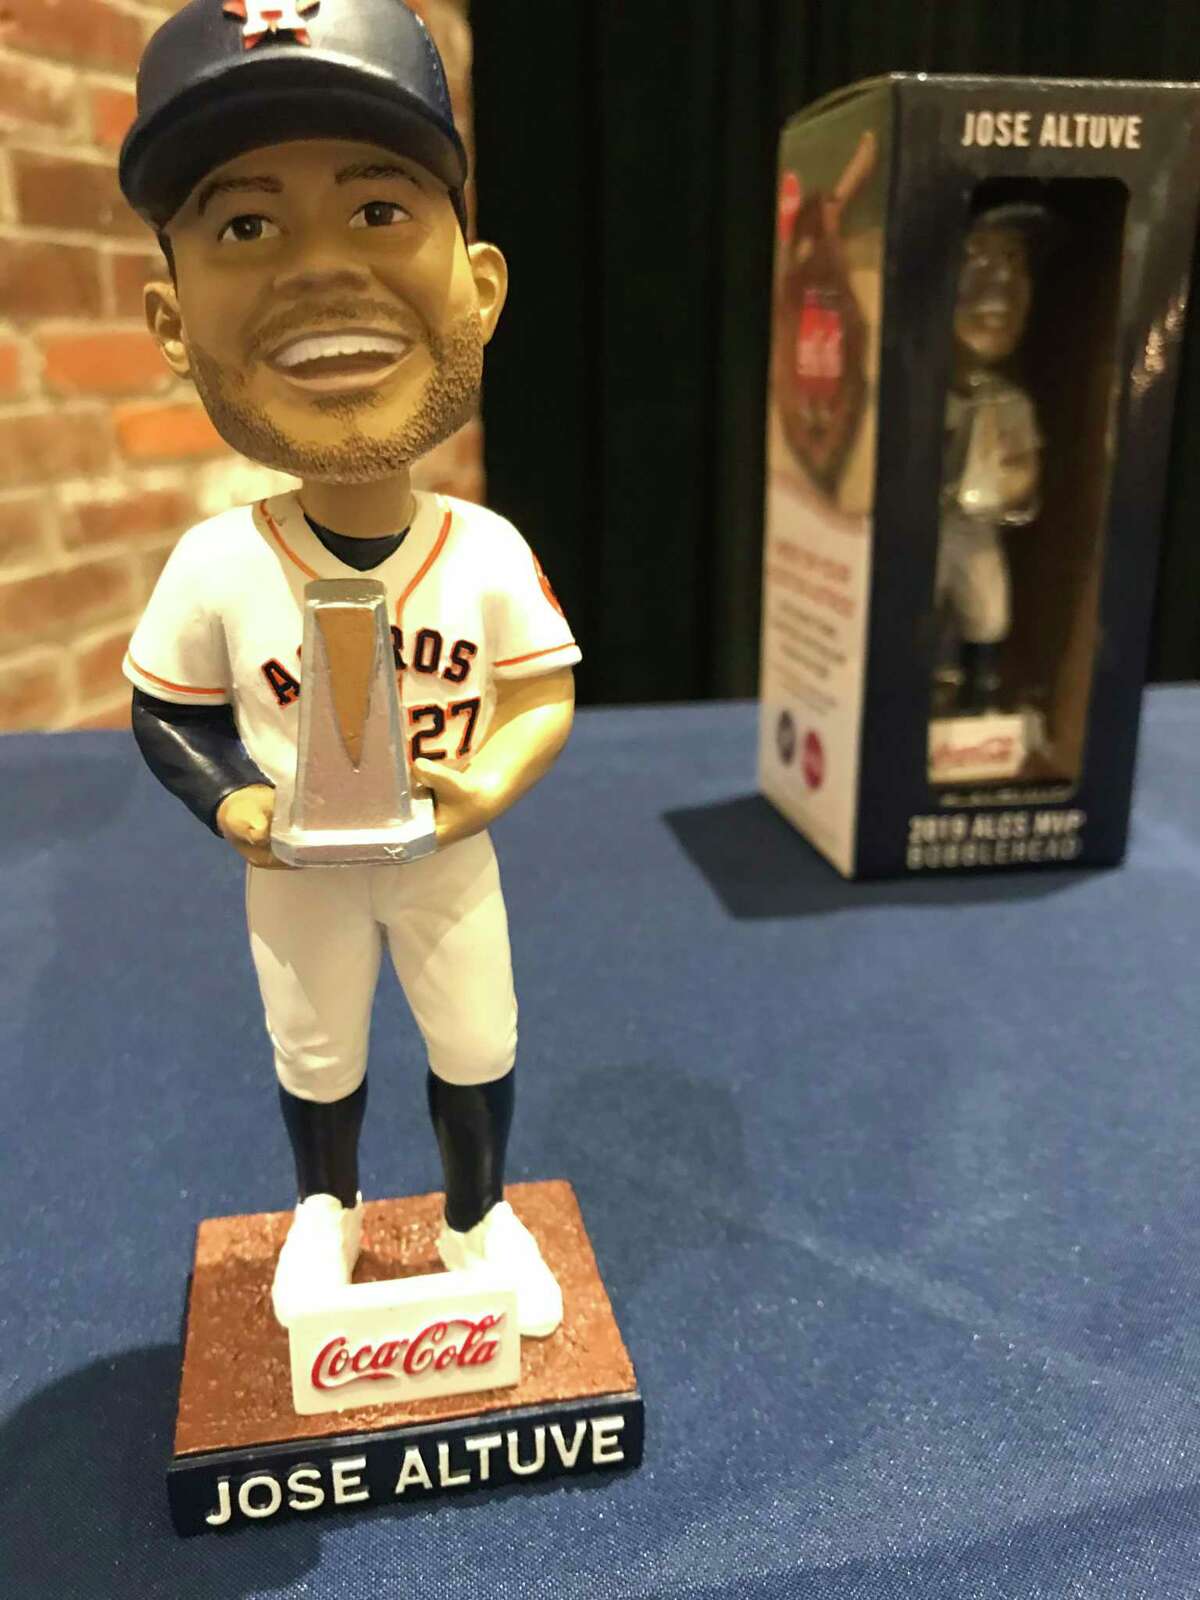 The Astros will give out a Jose Altuve ALCS MVP Bobblehead at the March 29 game against the Angels.